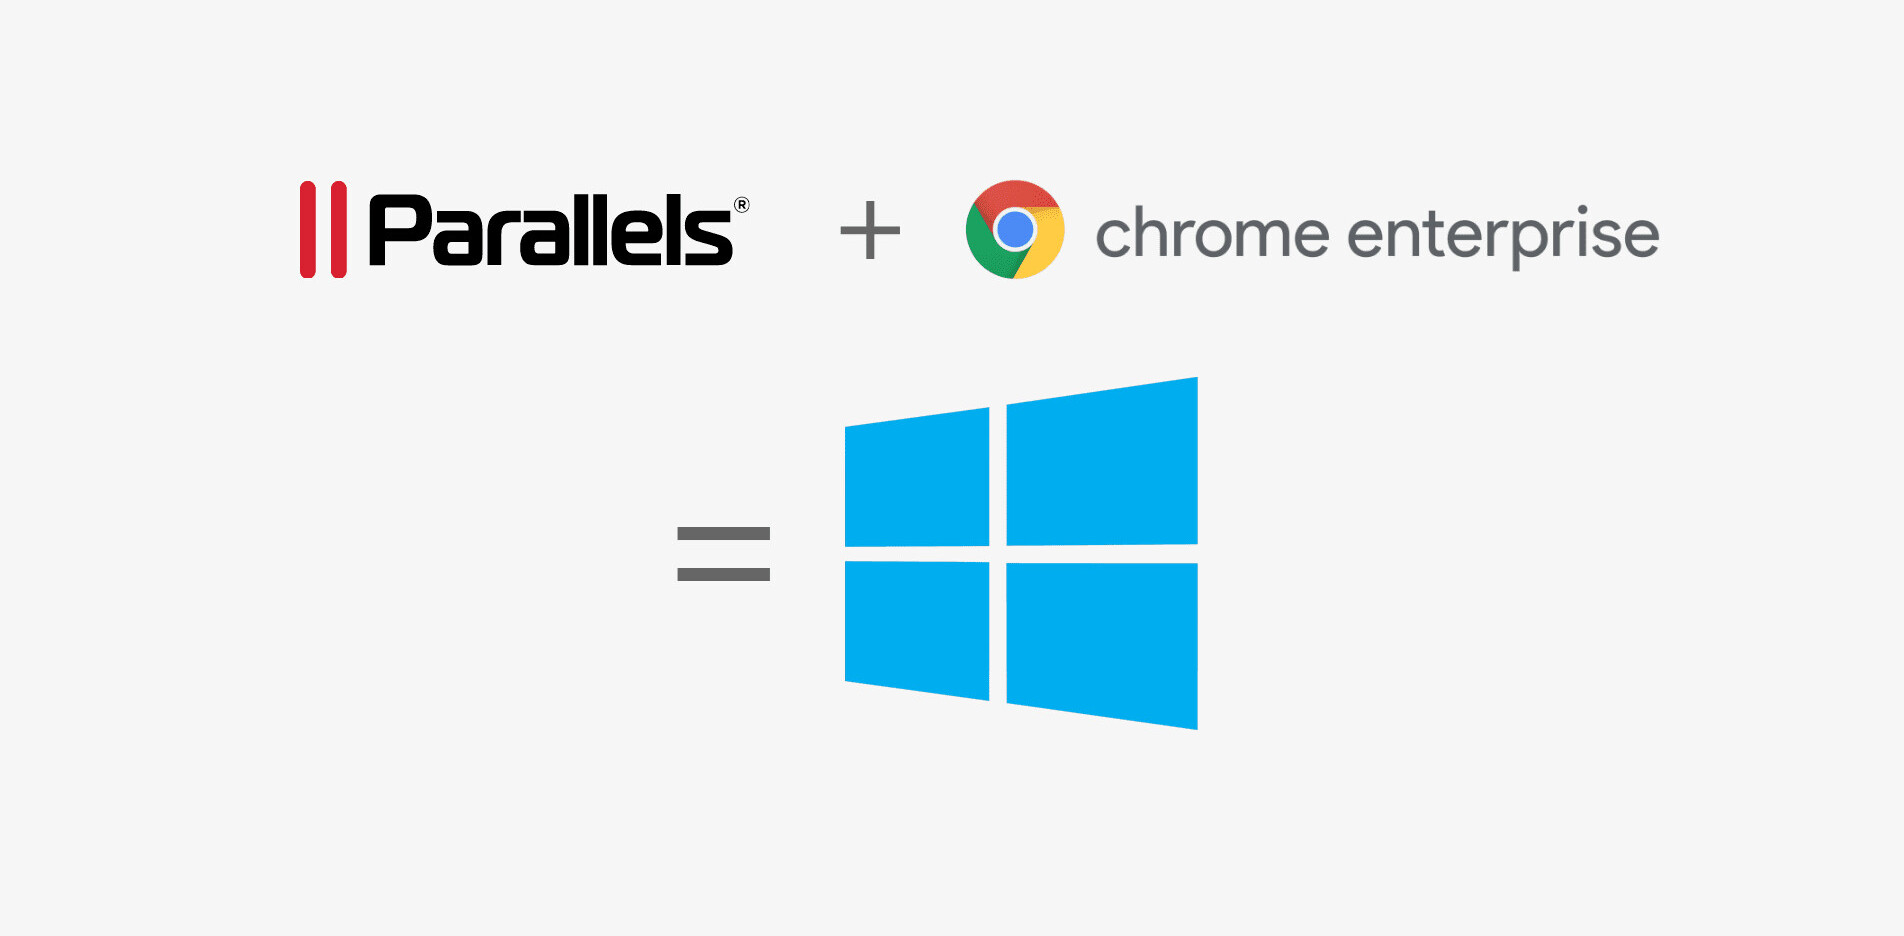 Windows is coming to Chromebooks as Google partners with Parallels